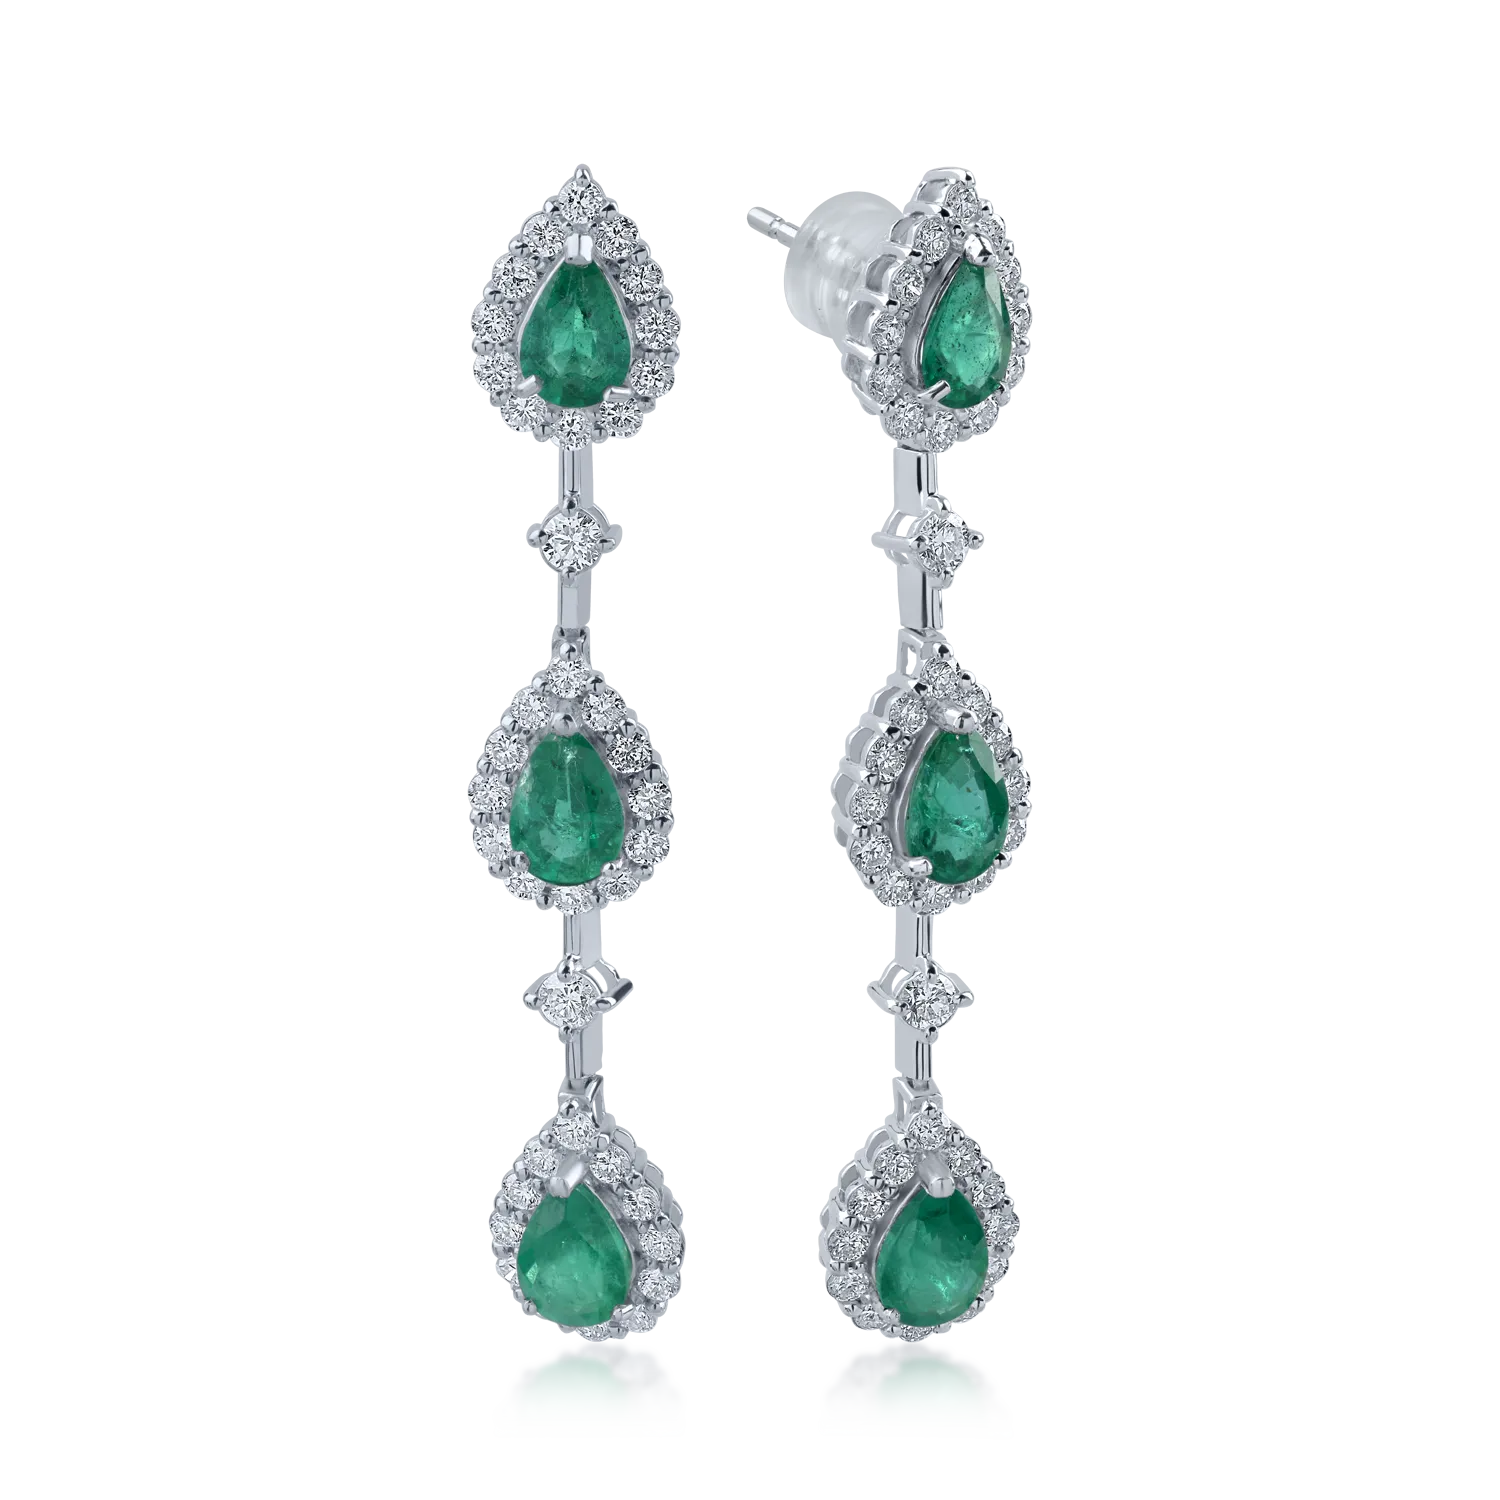 Platinum earrings with 2.16ct emeralds and 1.28ct diamonds